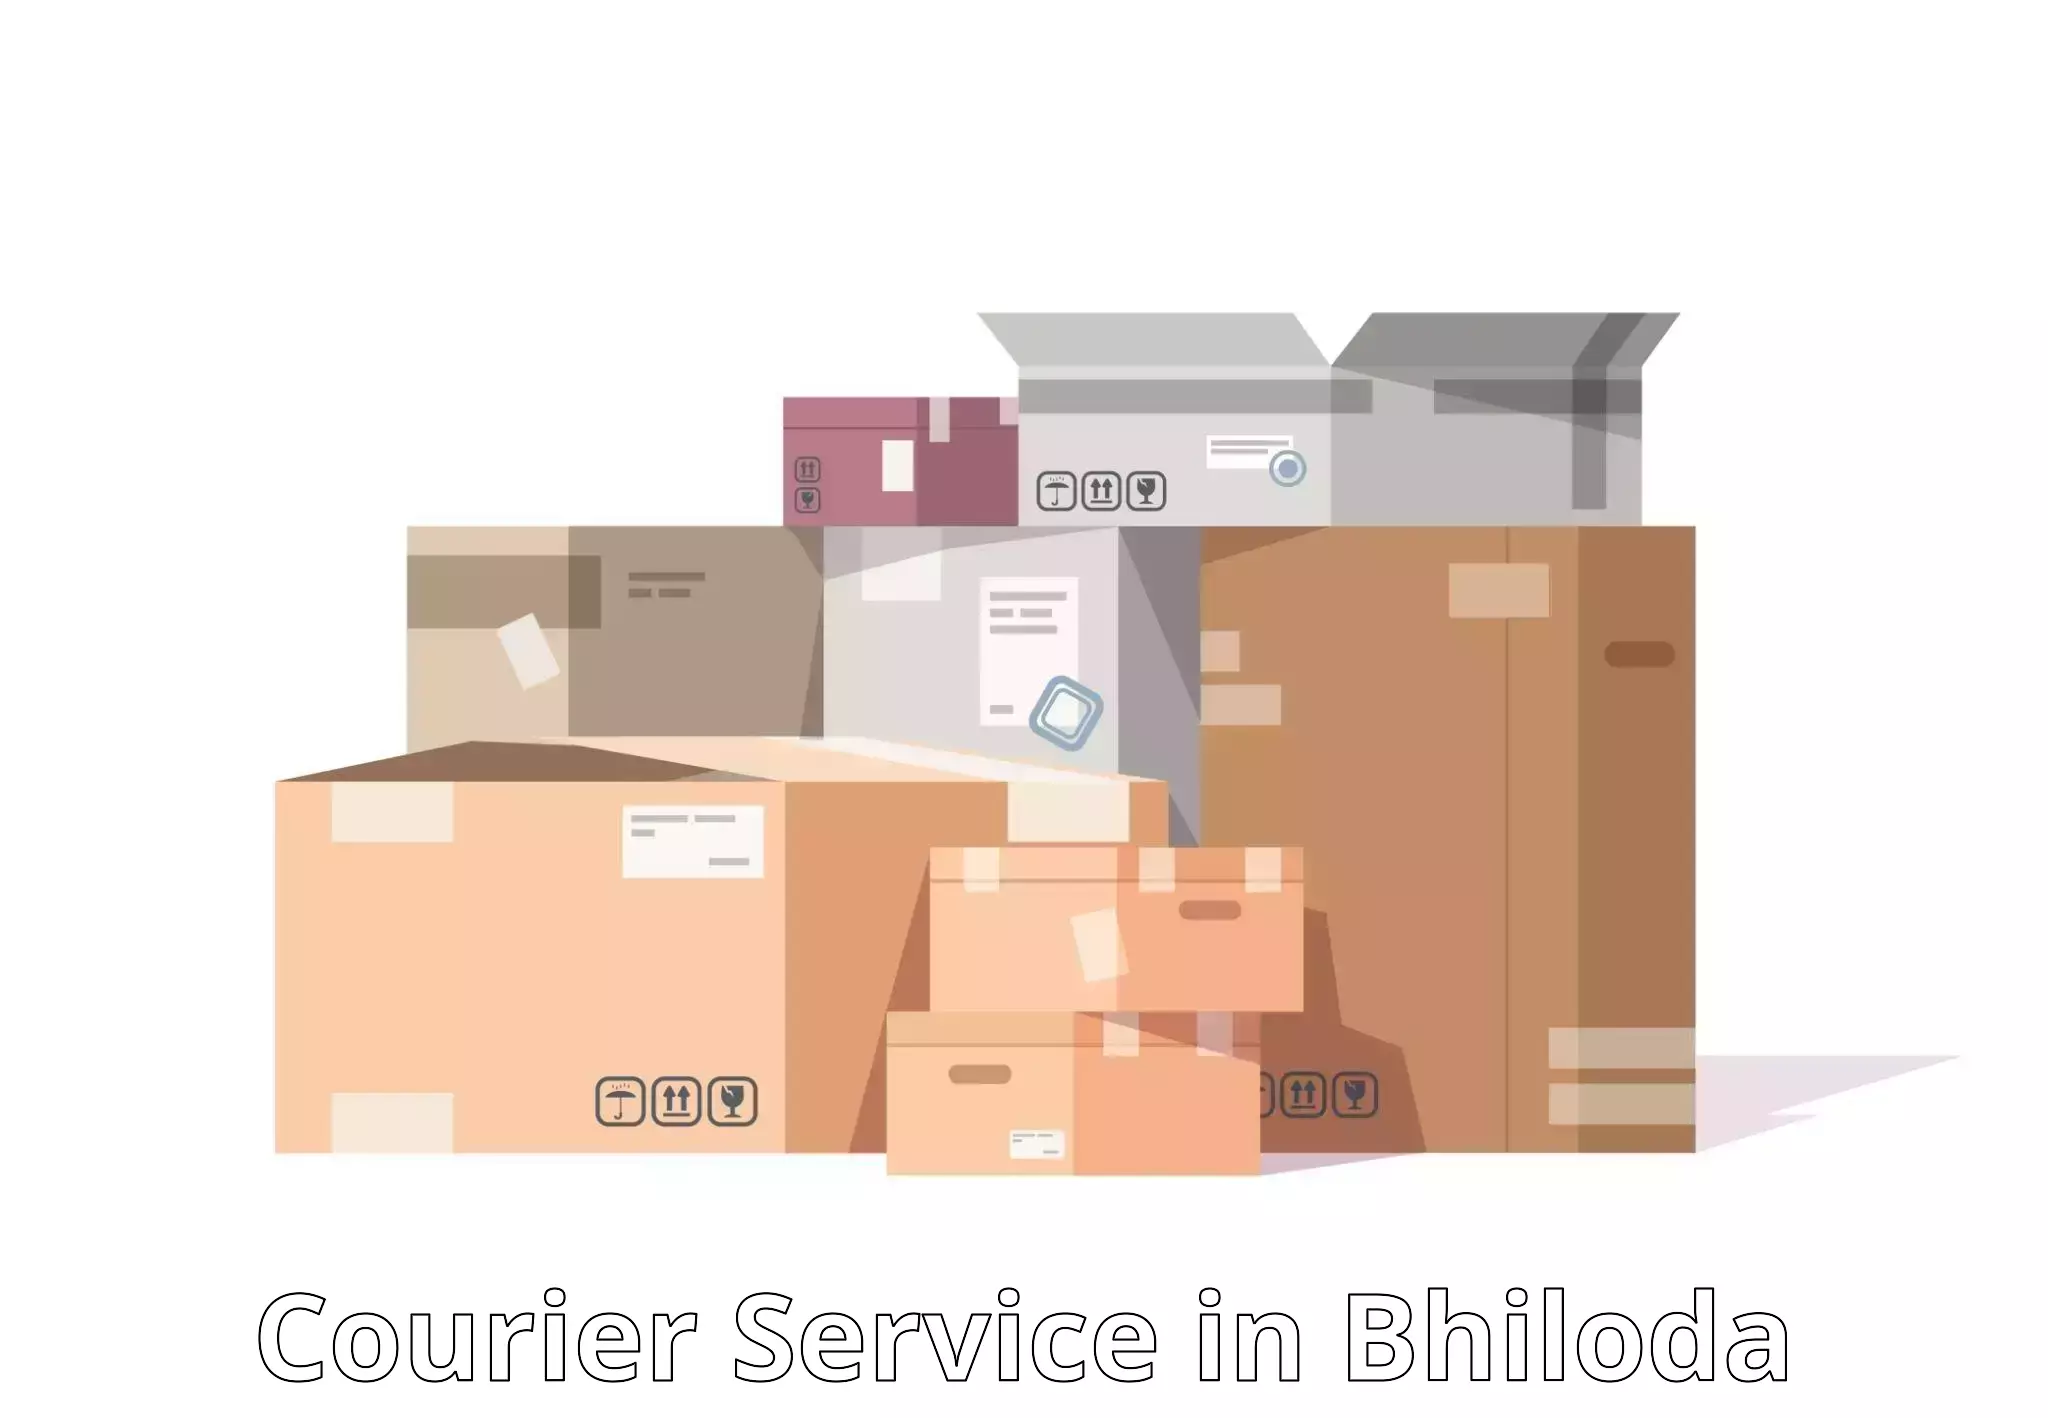 Parcel service for businesses in Bhiloda